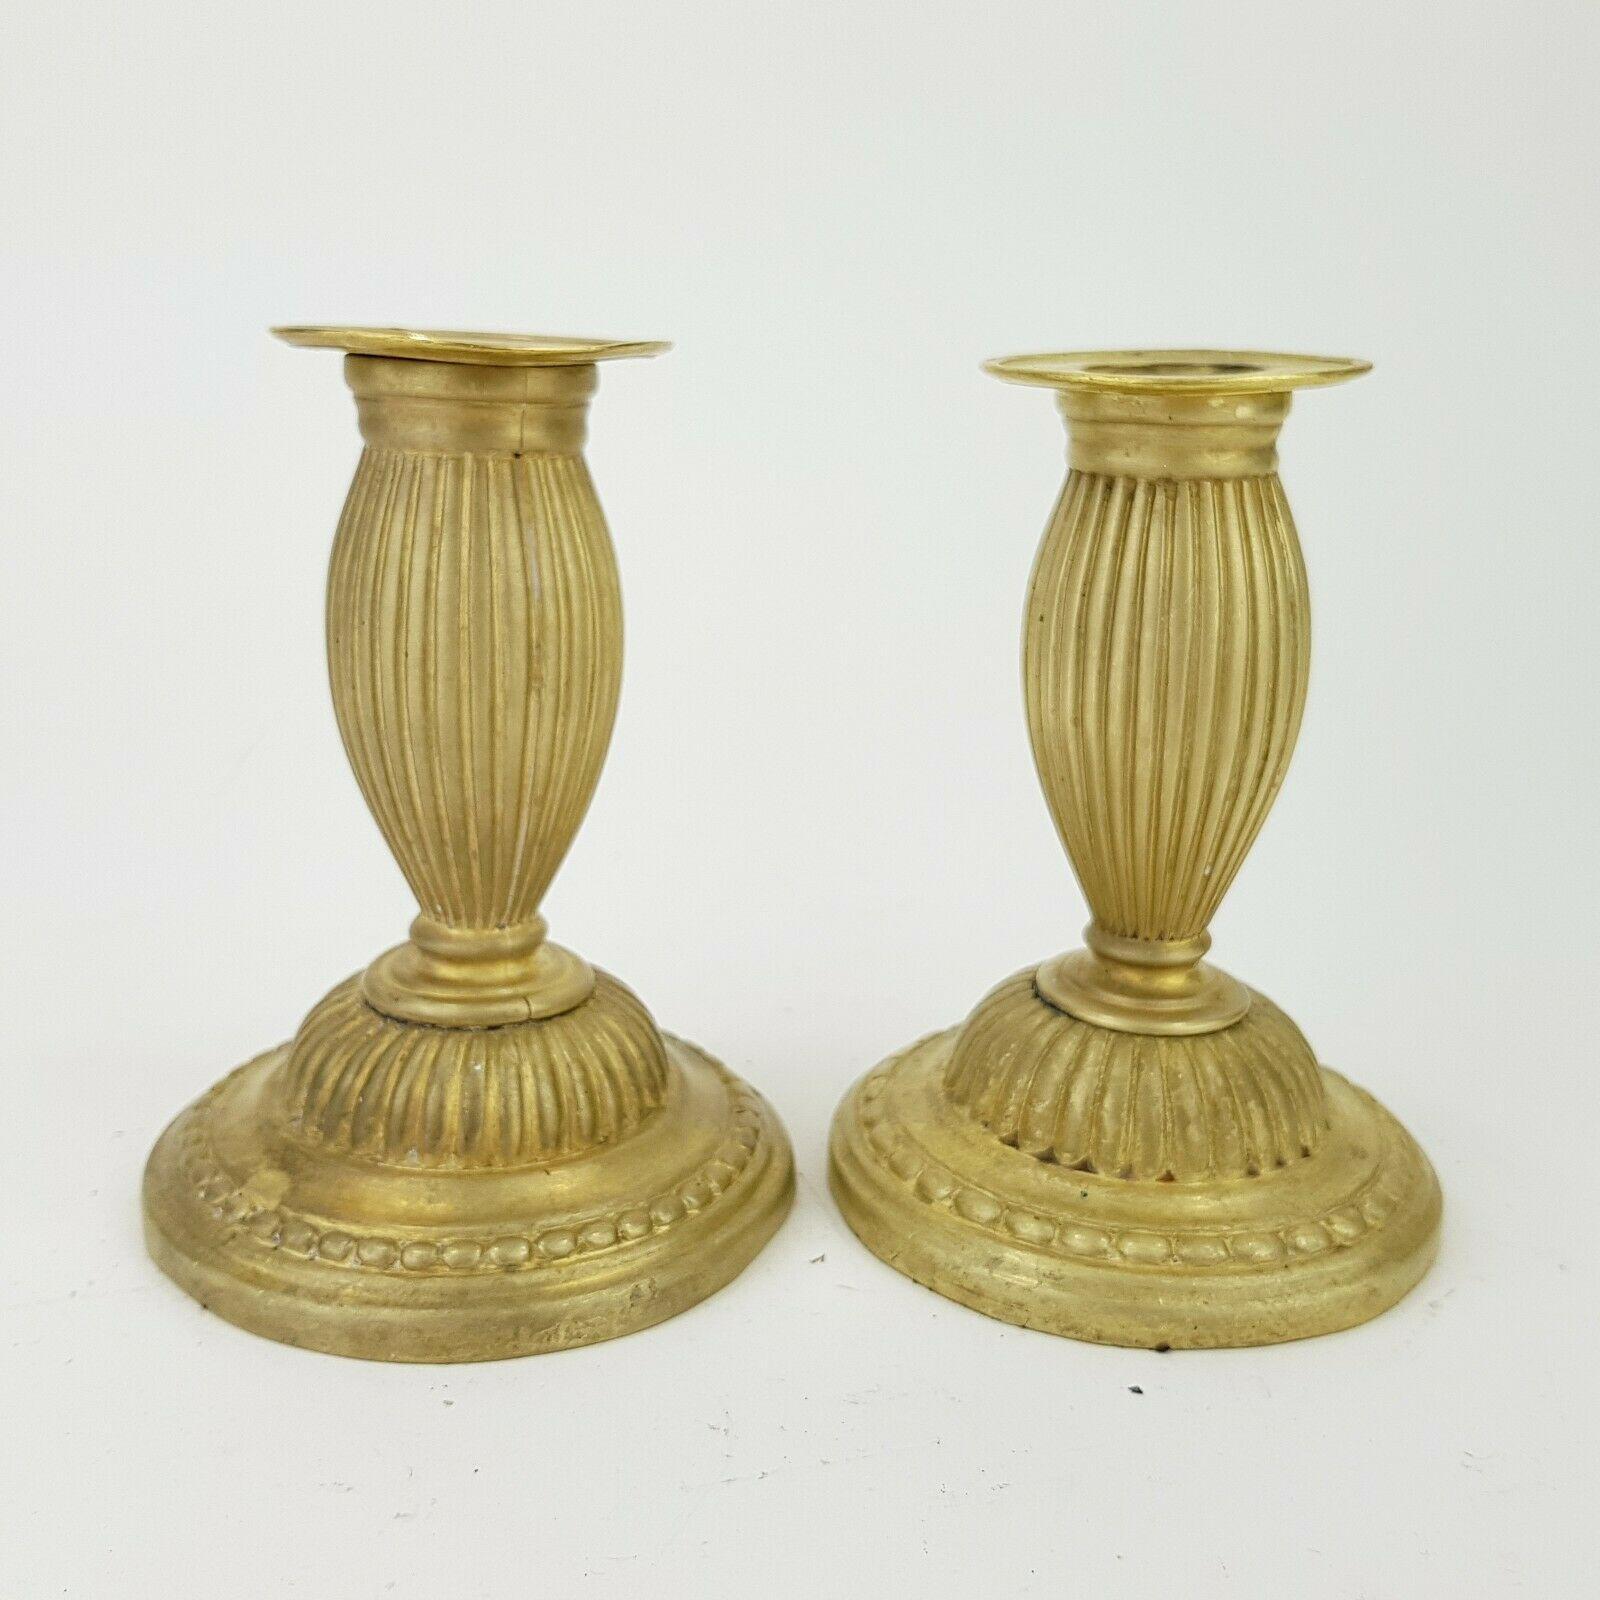 Late 18th Century 18thc Pair Louis XVI Fire Gilt Bronze Candlesticks/ Candle Holders For Sale